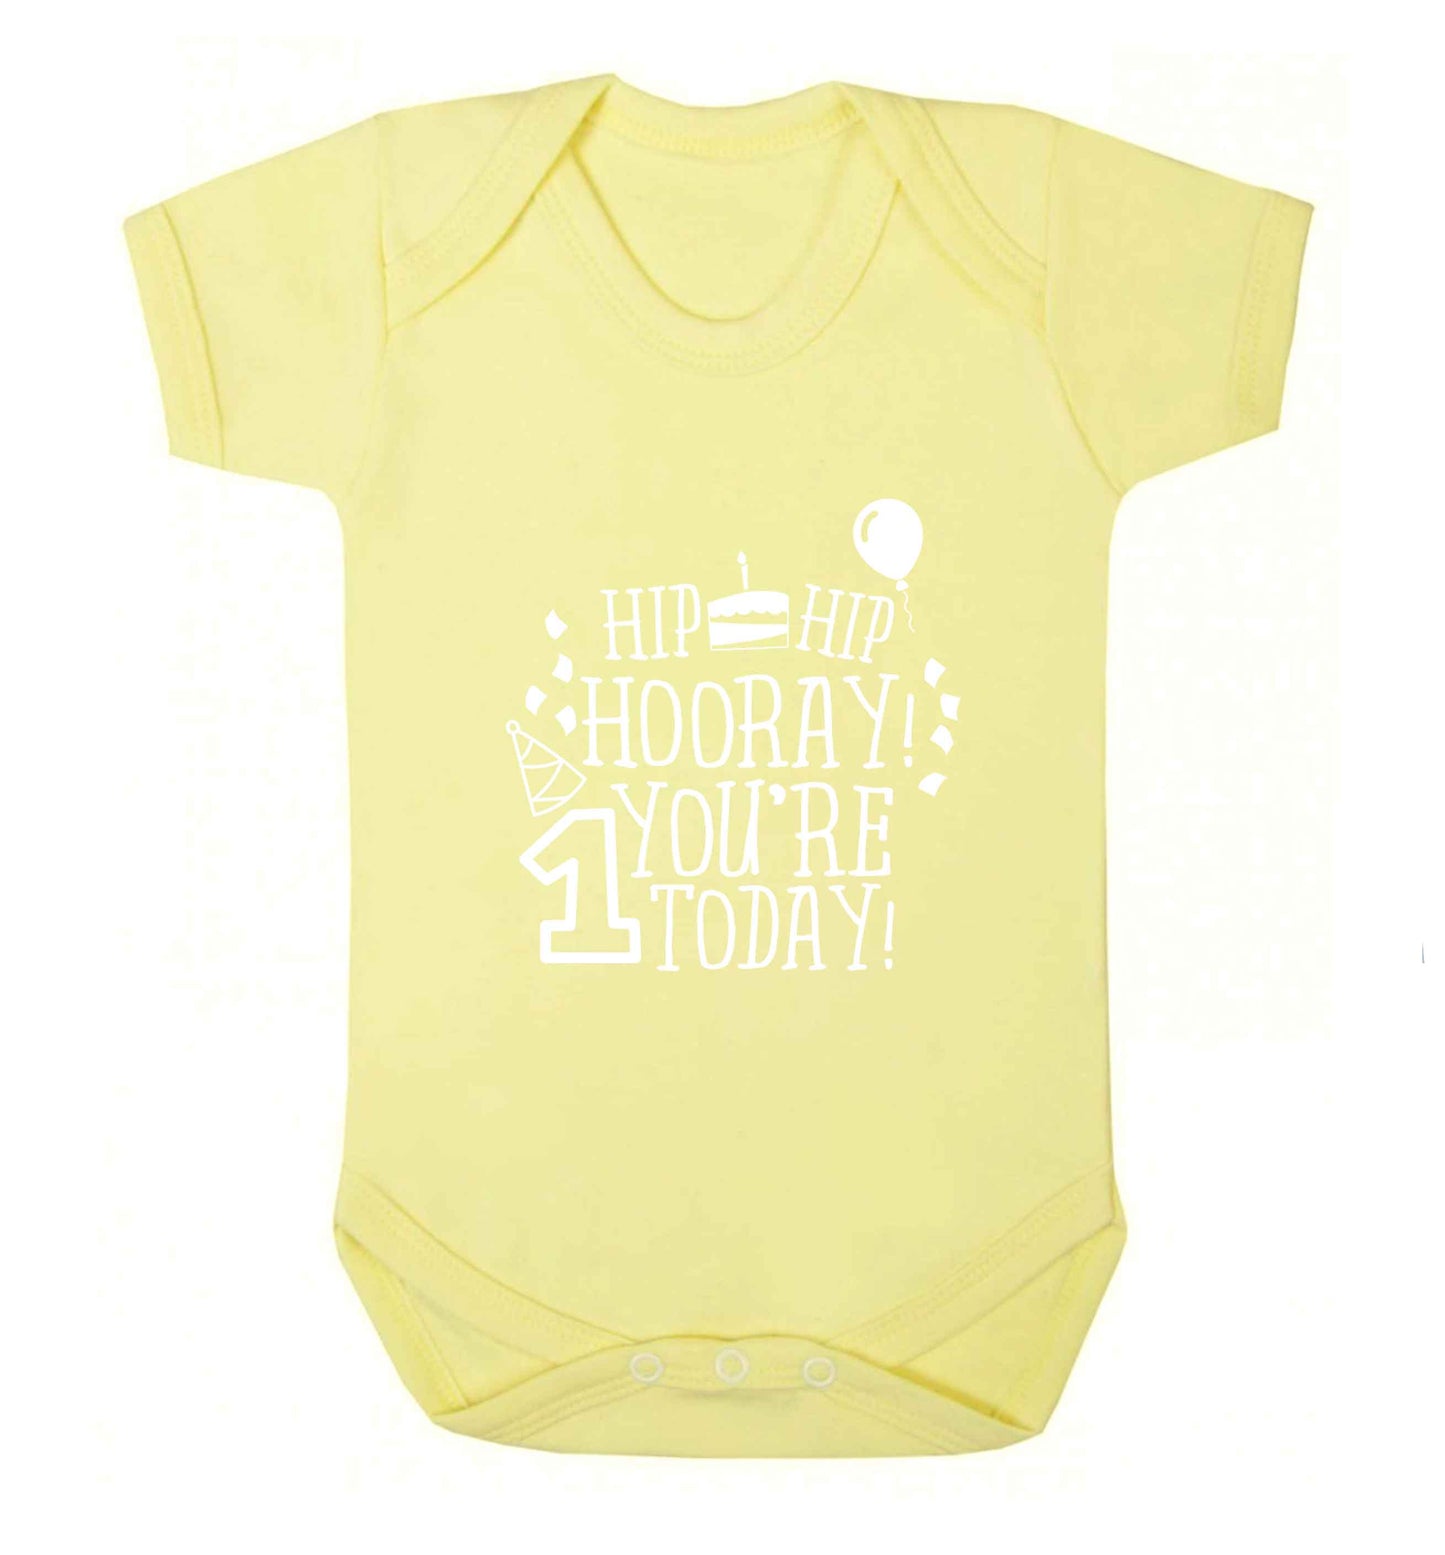 You're one today baby vest pale yellow 18-24 months